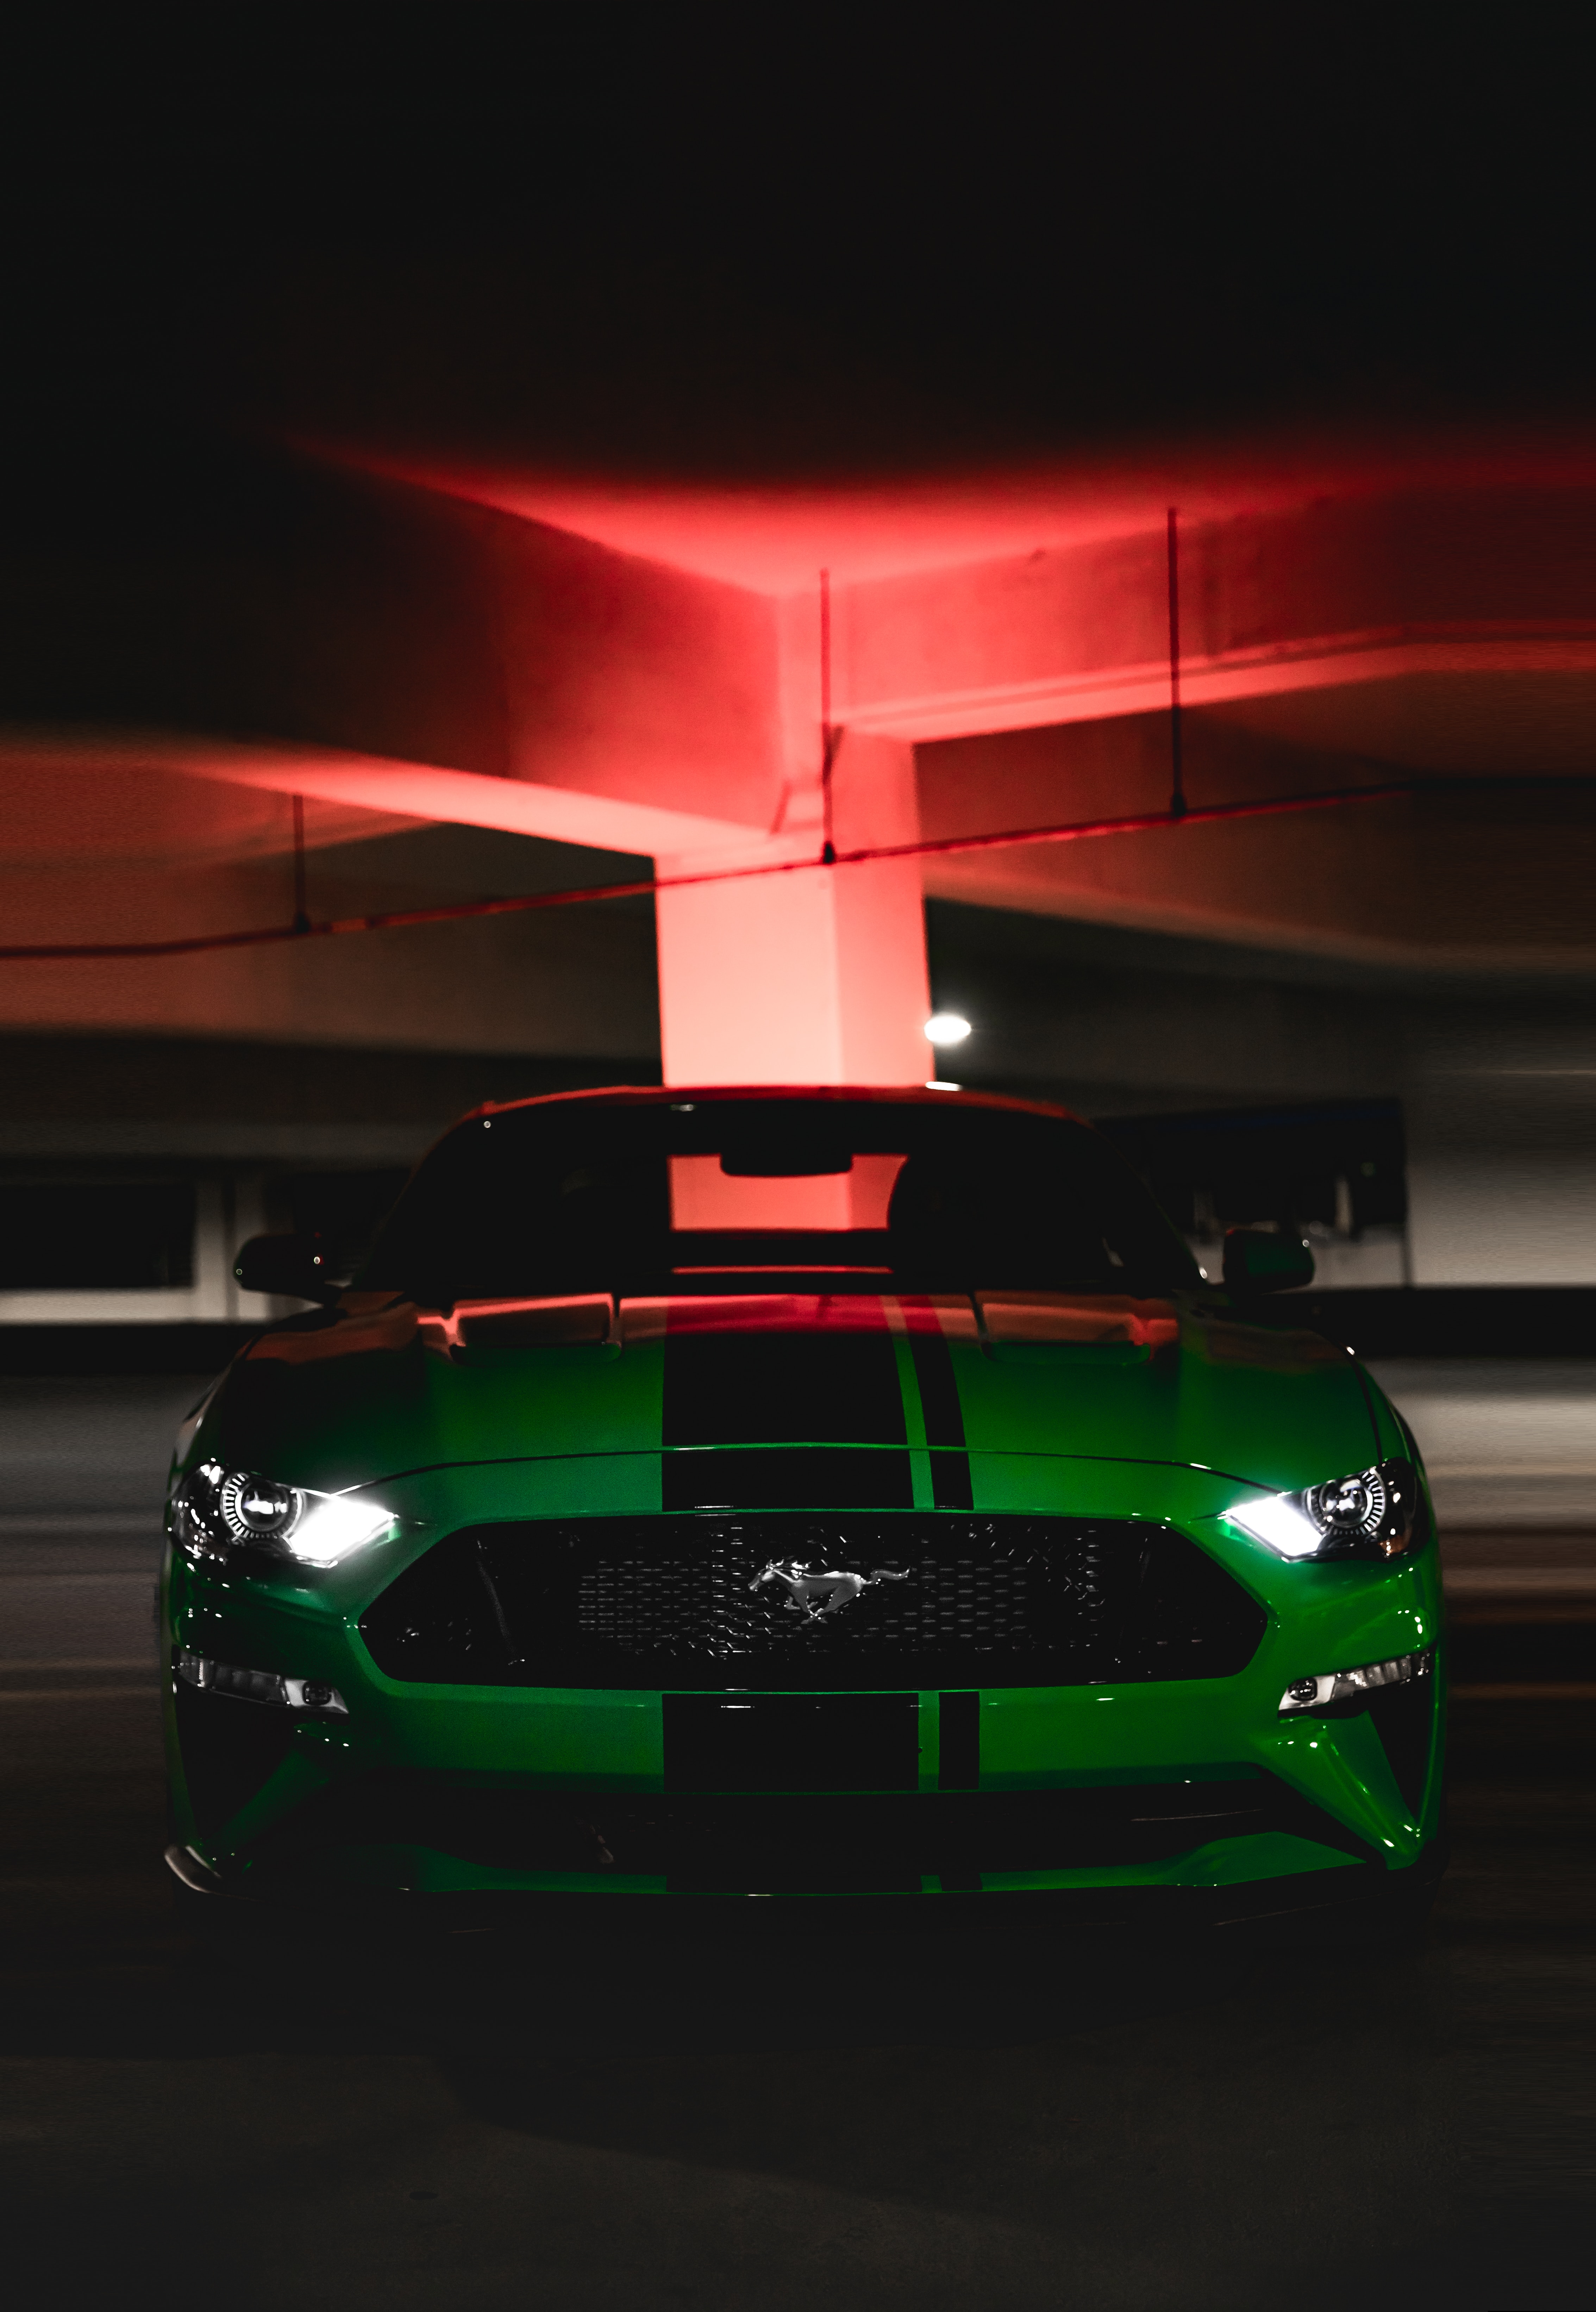 Popular Ford Mustang images for mobile phone